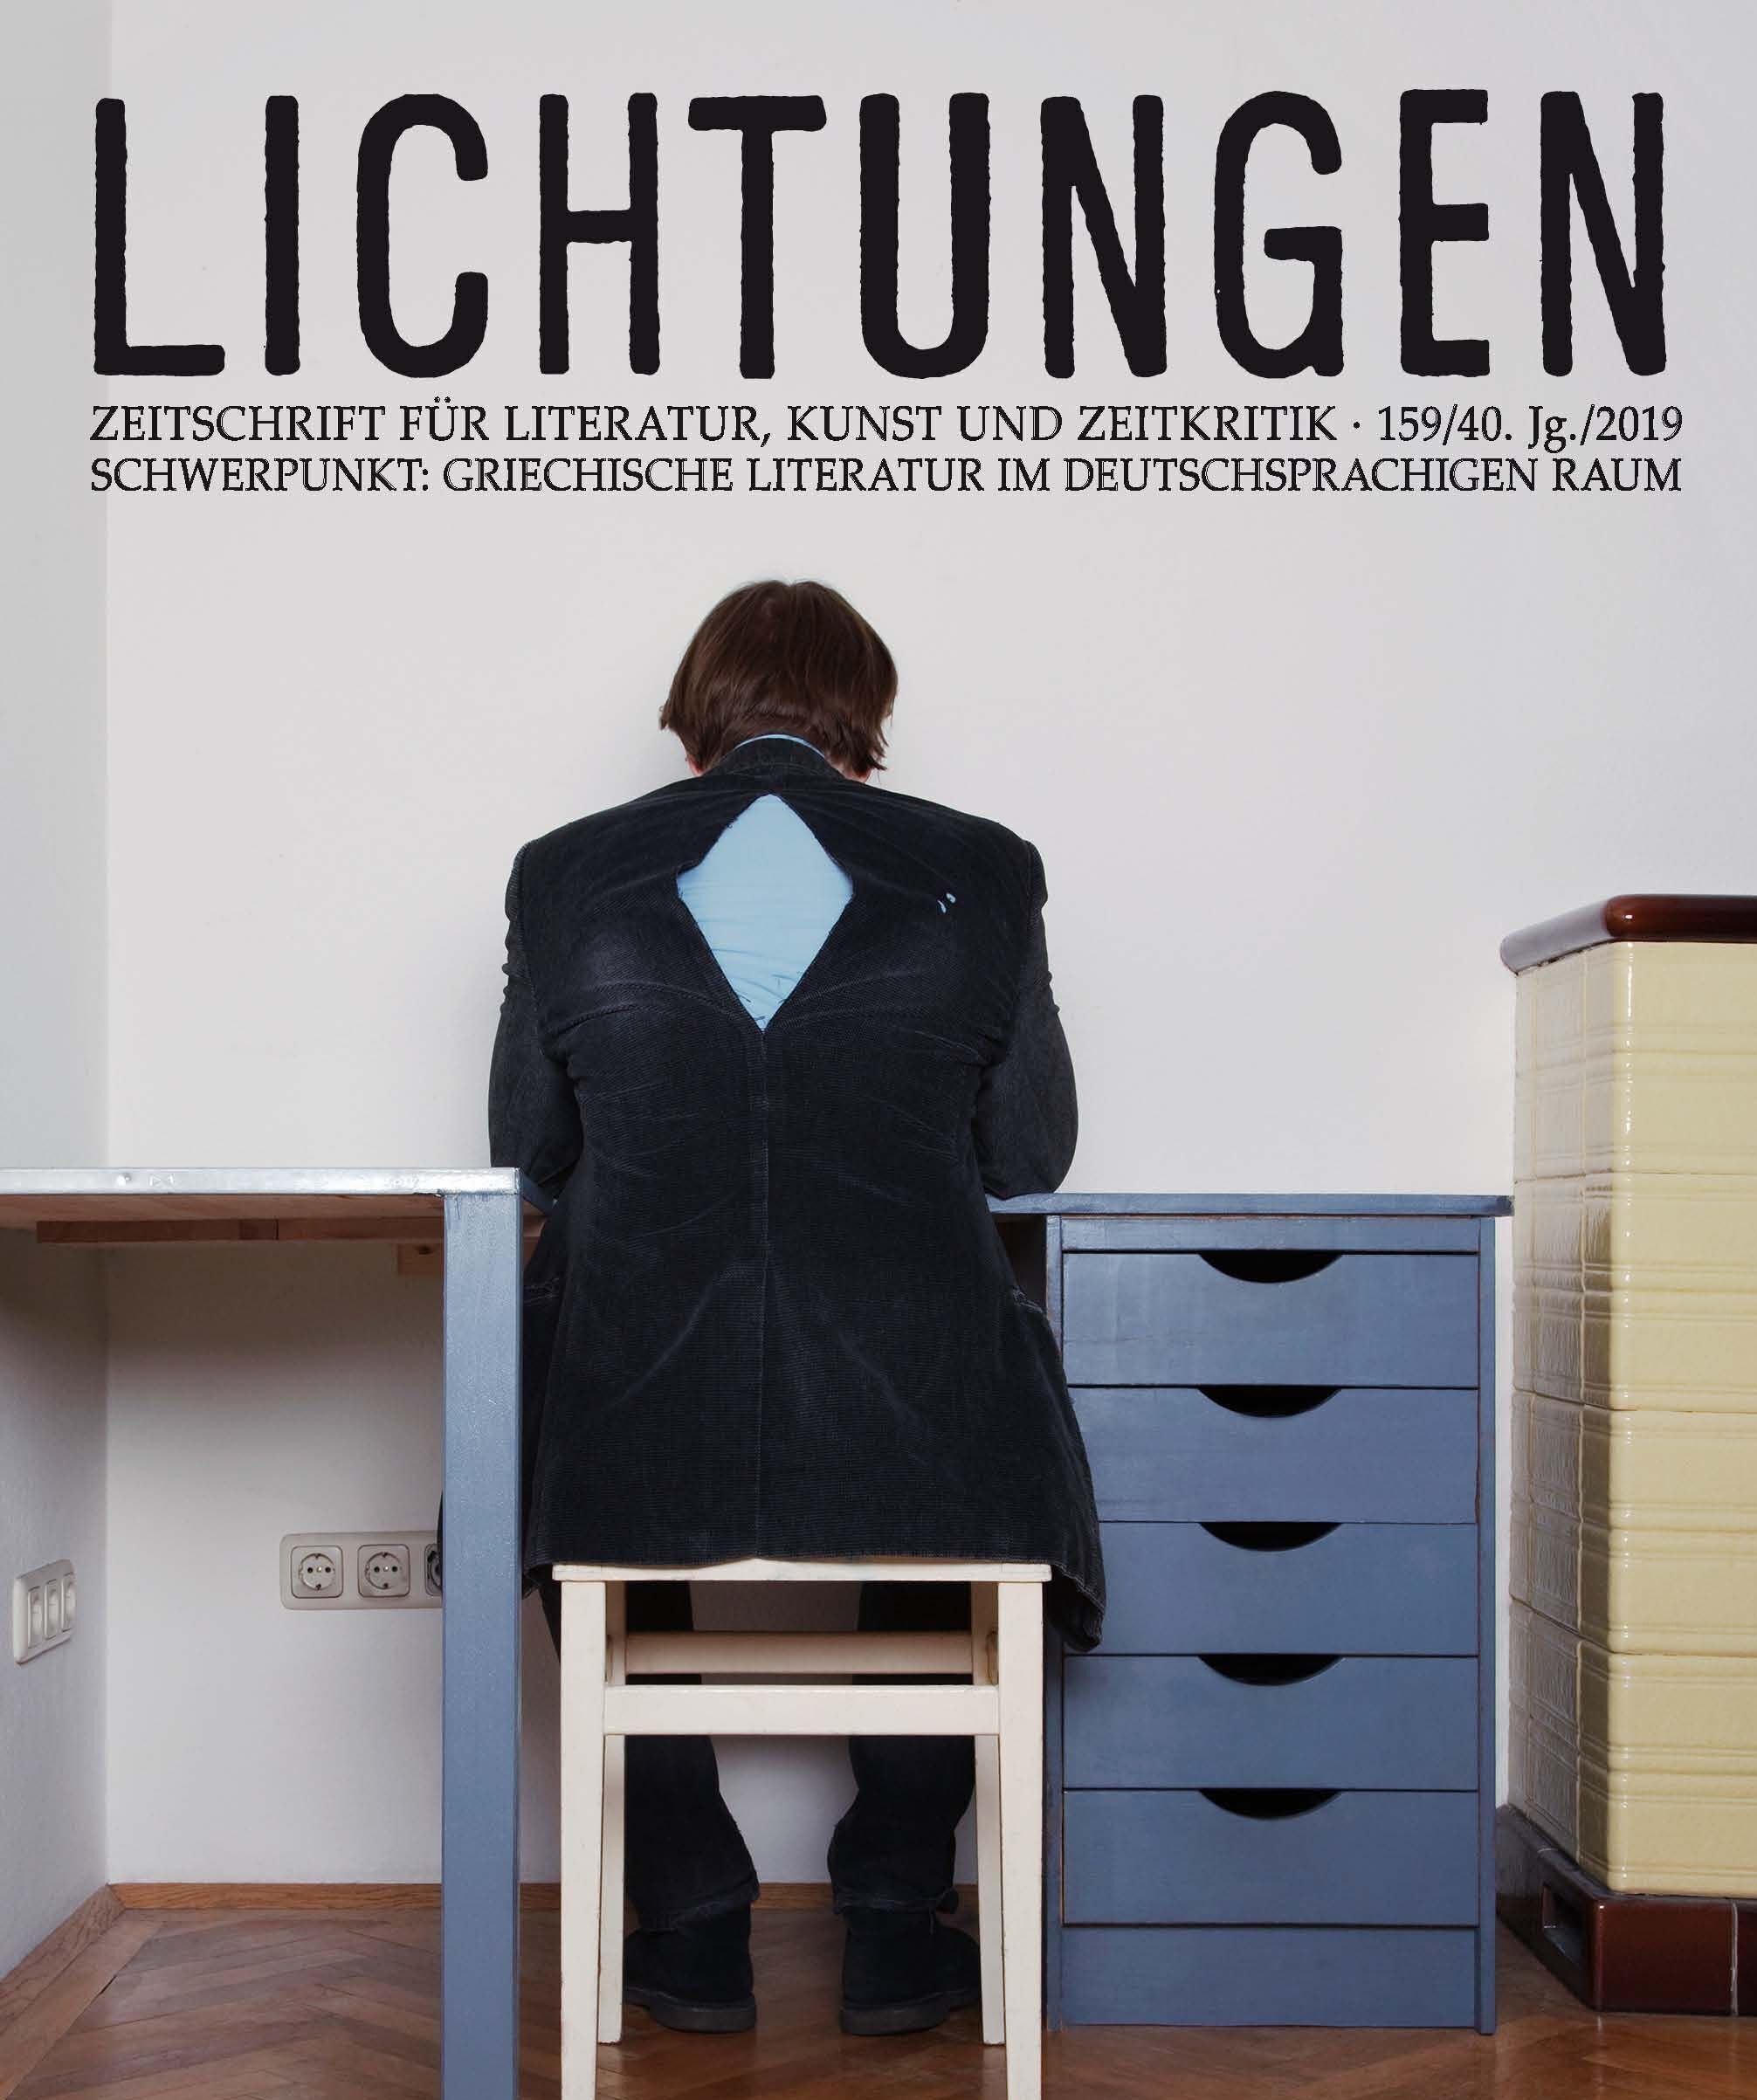 The Short Play ‘A Breath Of Freedom’ From SPLINTERS Is Published In German In The Literary Magazine Lichtungen, 2019